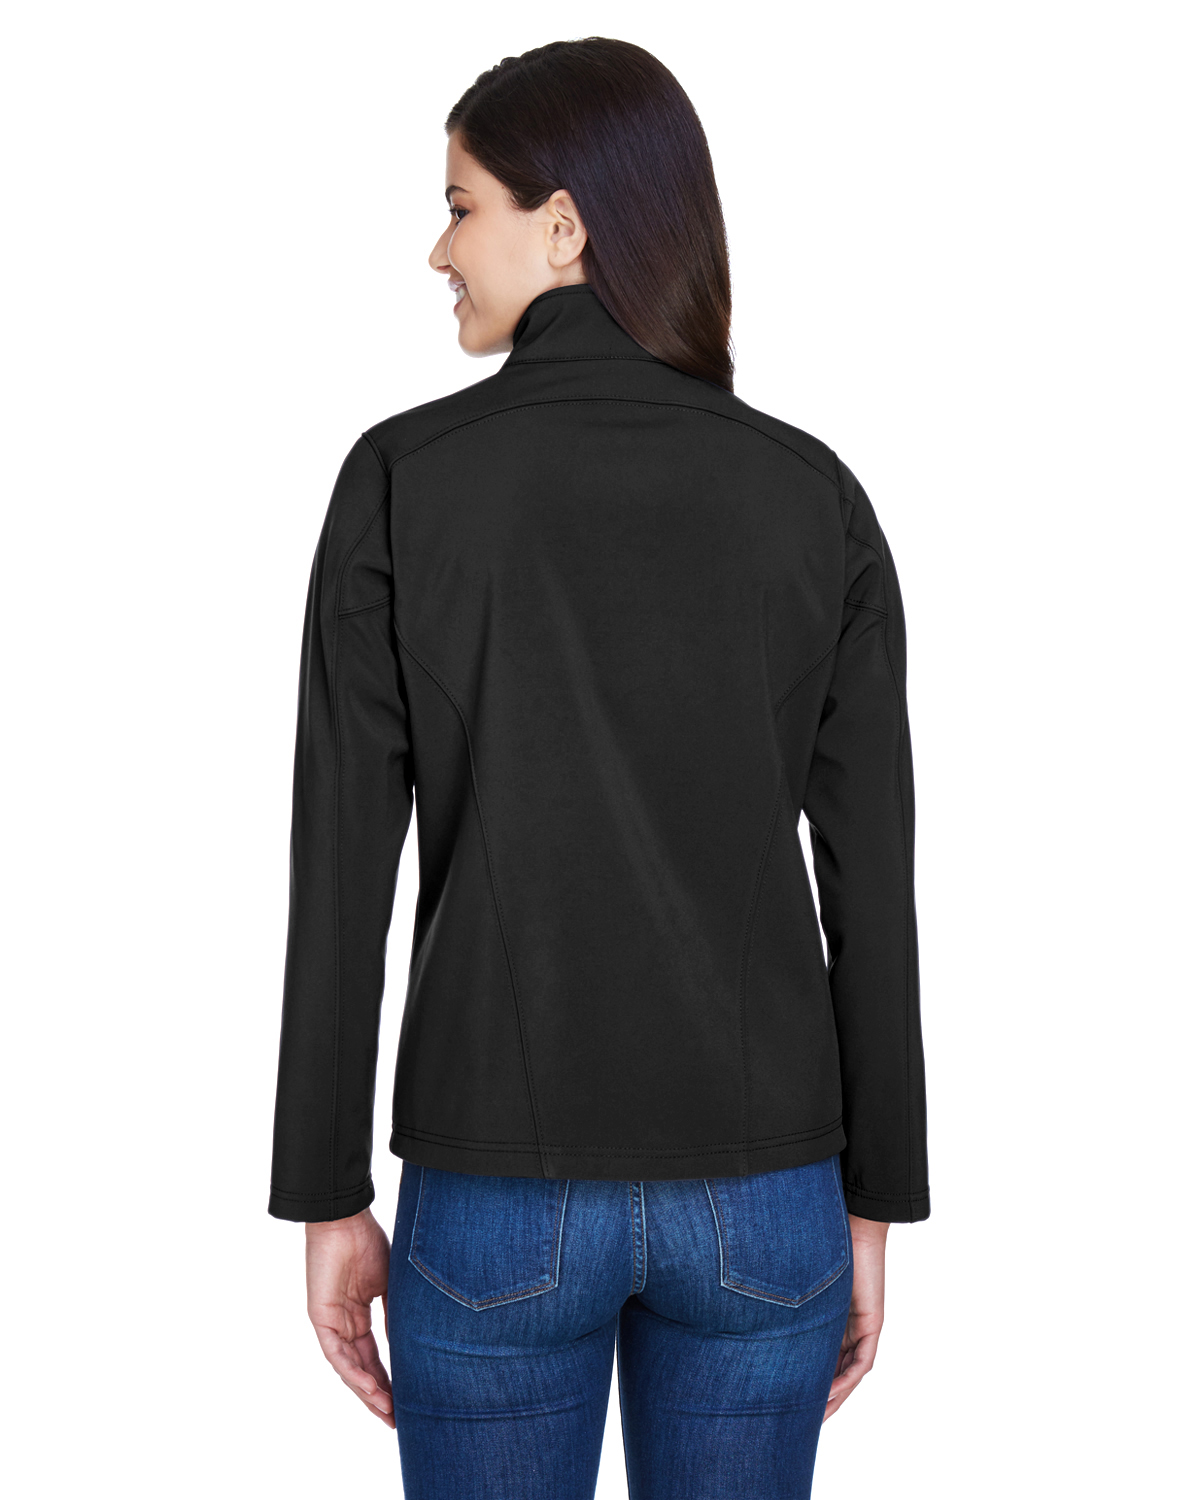 Ladies' Cruise Two-Layer Fleece Bonded Soft&nbsp;Shell Jacket - BLACK - XL - image 2 of 3